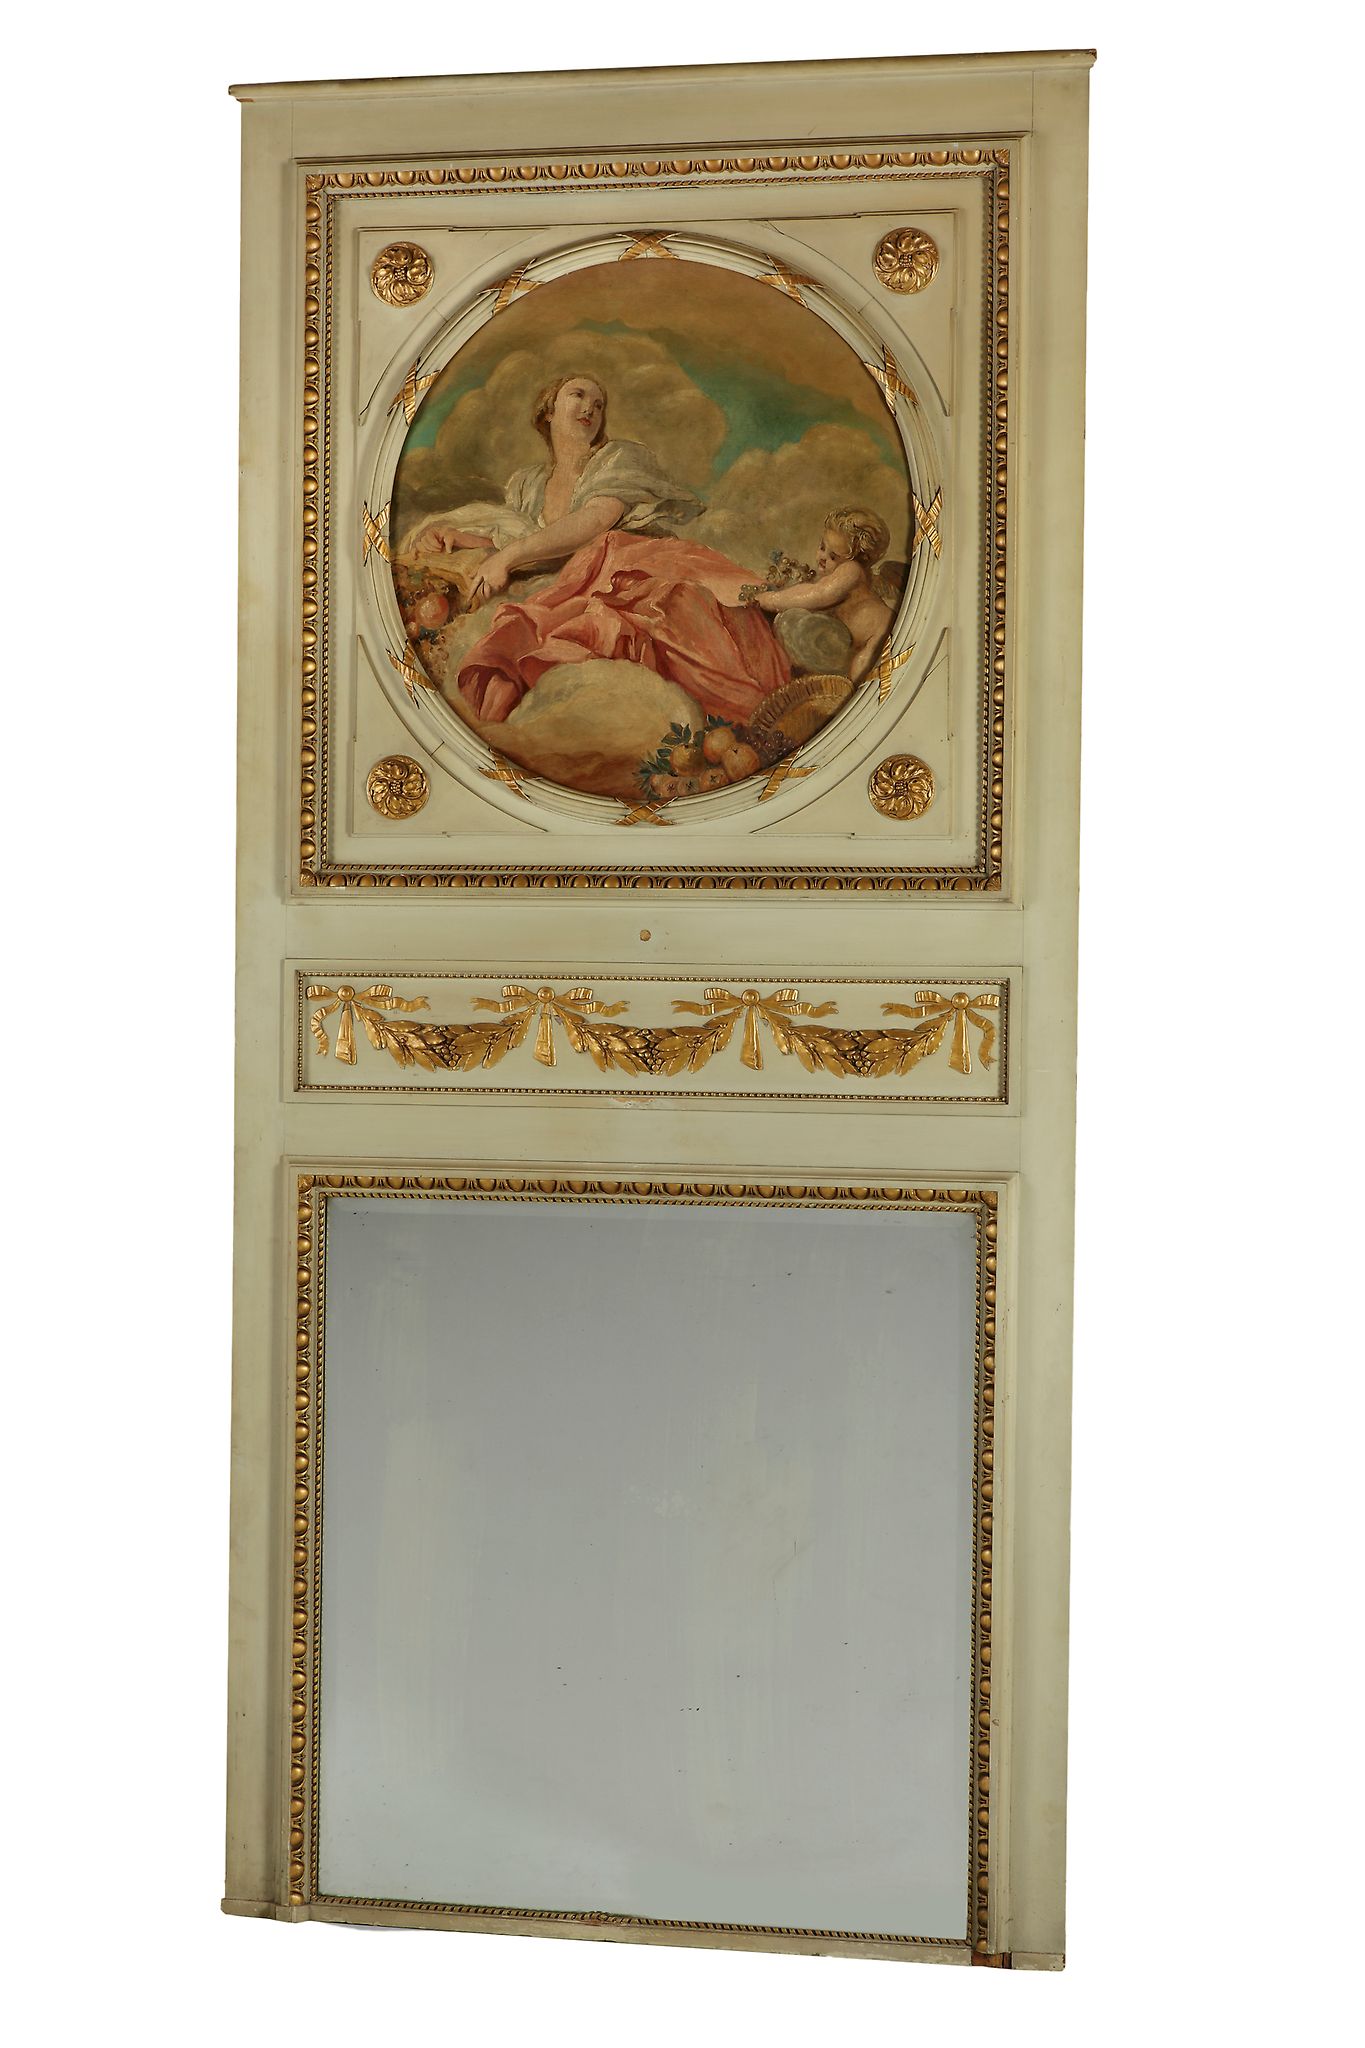 A French painted and parcel gilt trumeau mirror in Louis XVI taste  A French painted and parcel gilt